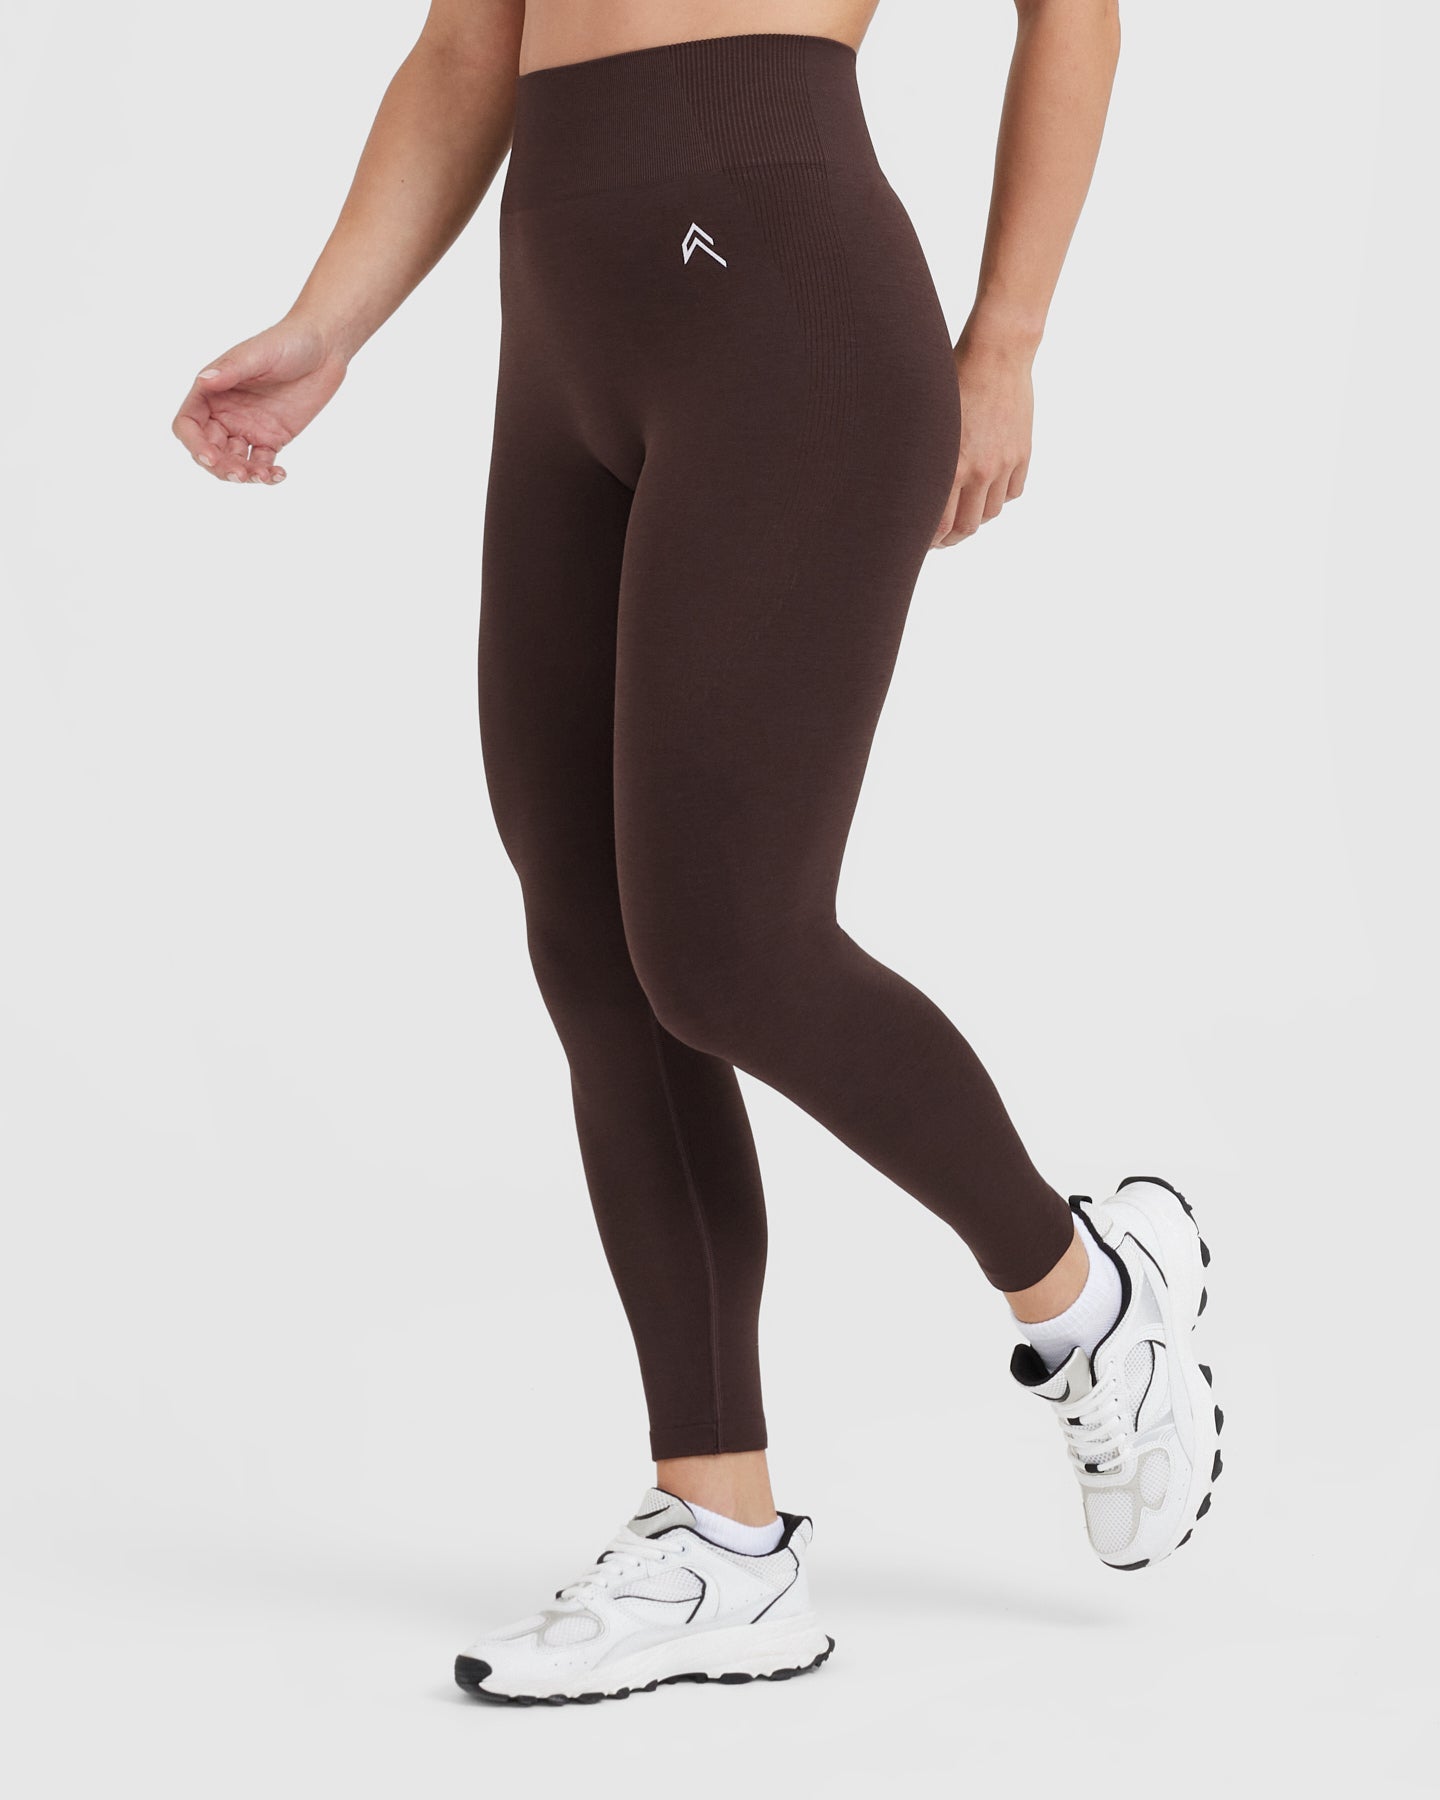 Cocoa 70% | Seamless Active 2.0 Oner Classic Marl Leggings US